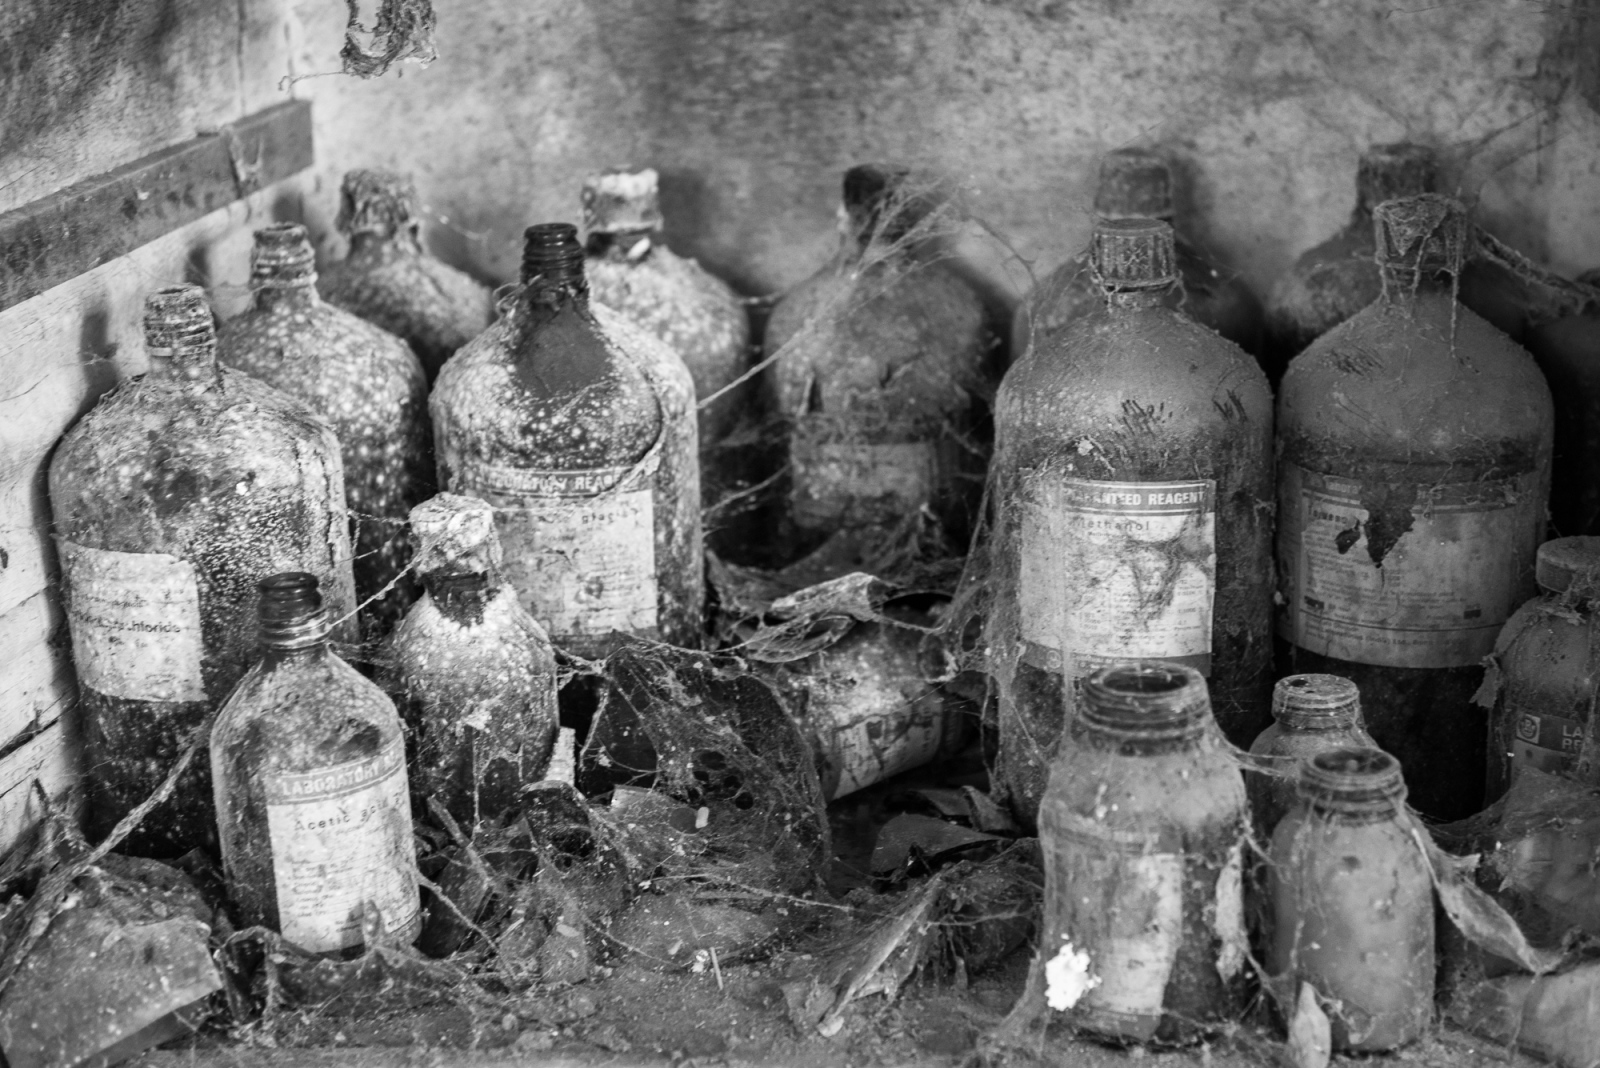 Discarded jars of chemicals sit..., impacting the health of many.